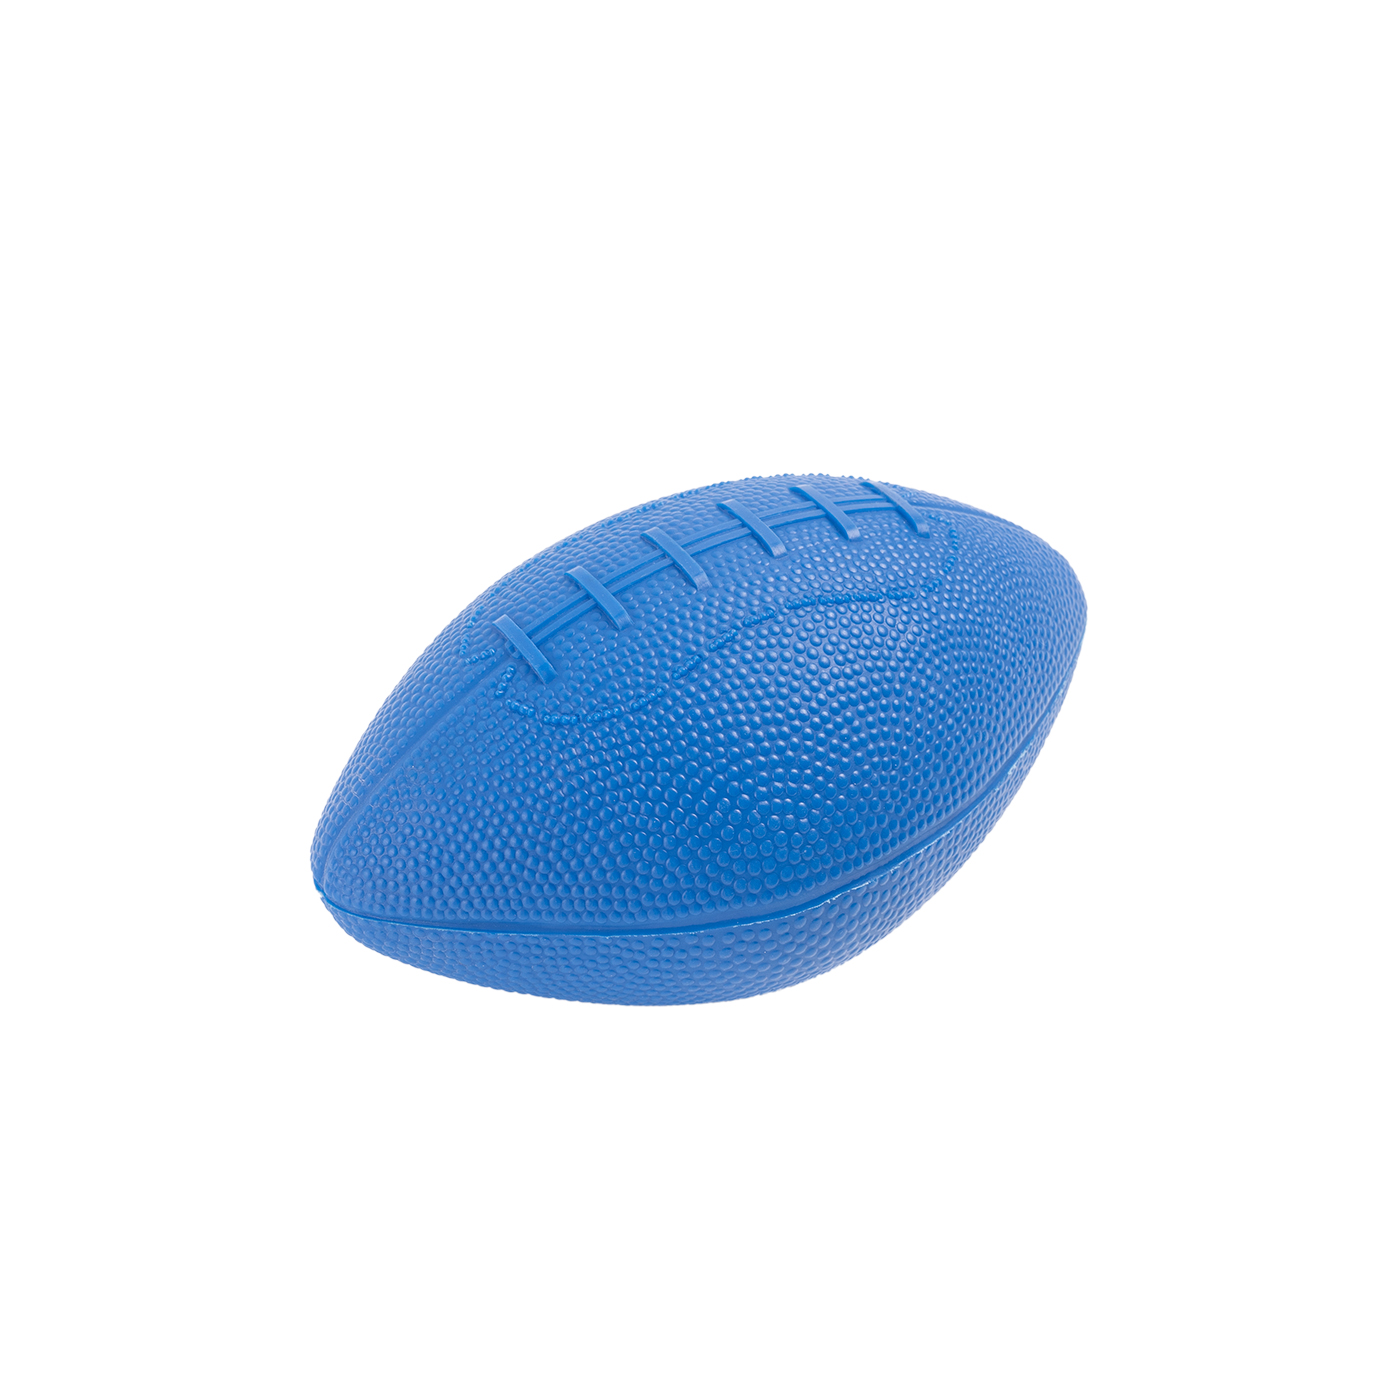 Rugby Stress Release Squeeze Toy1